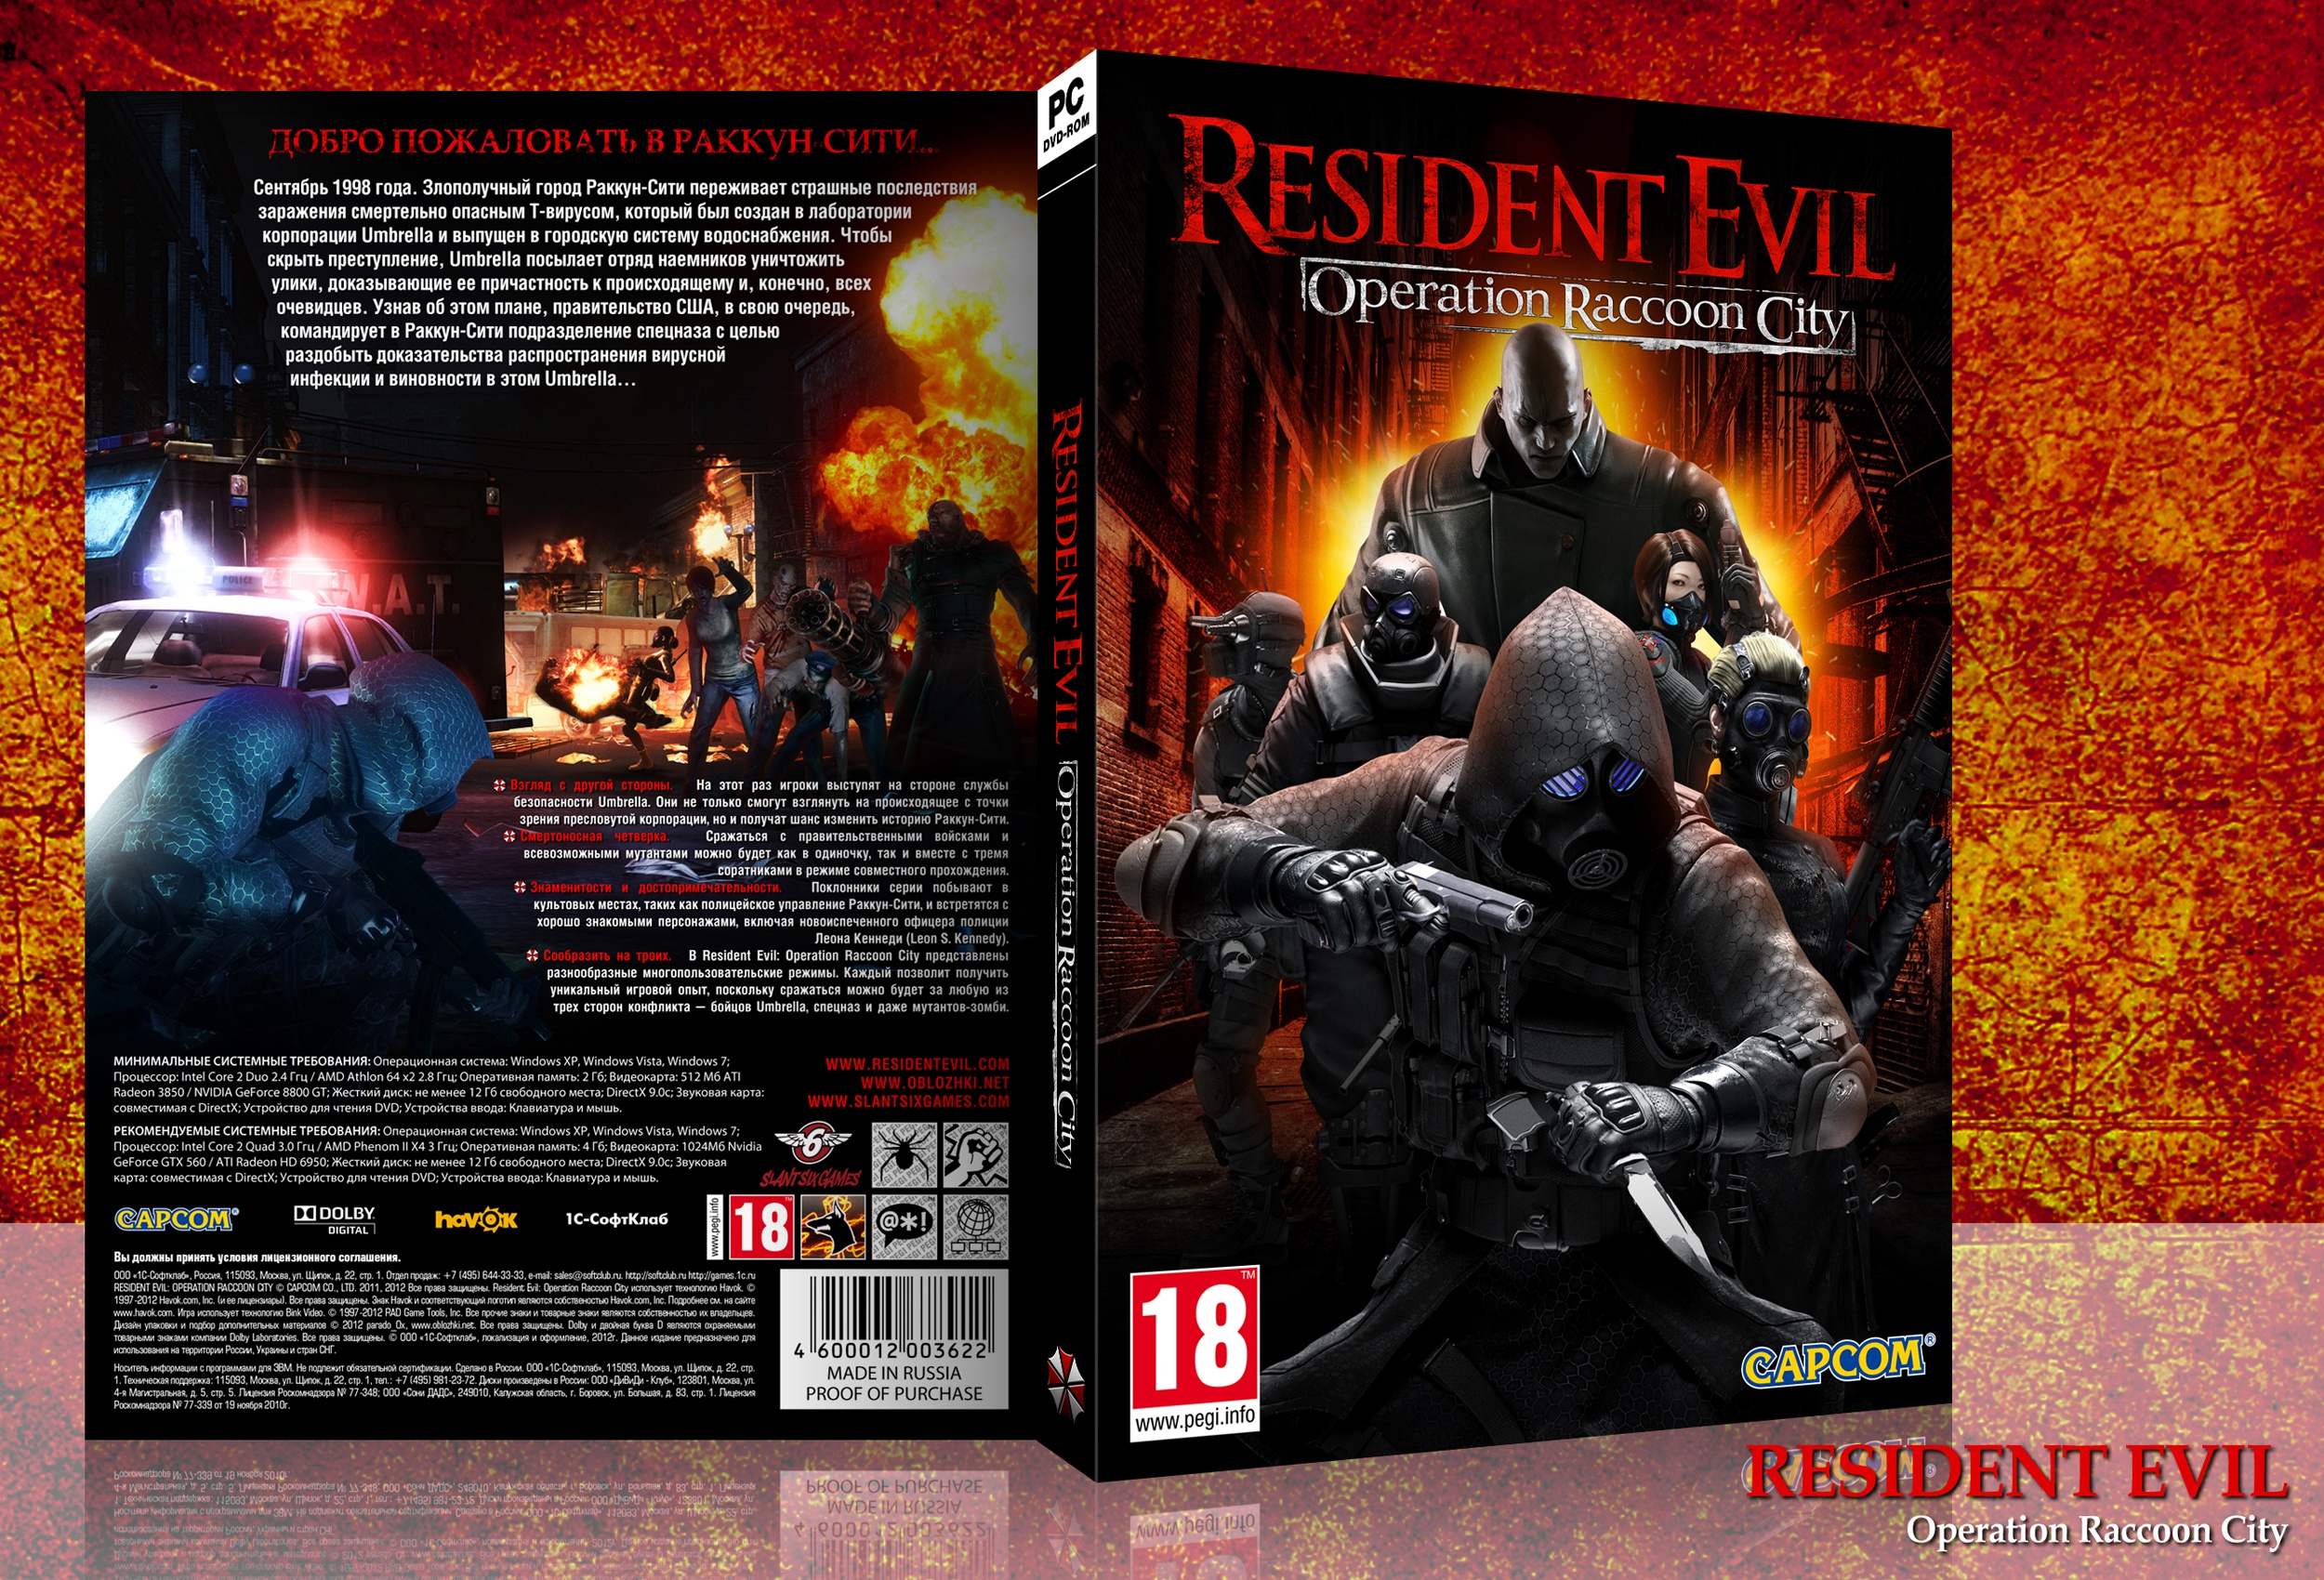 Resident Evil: Operation Raccoon City box cover